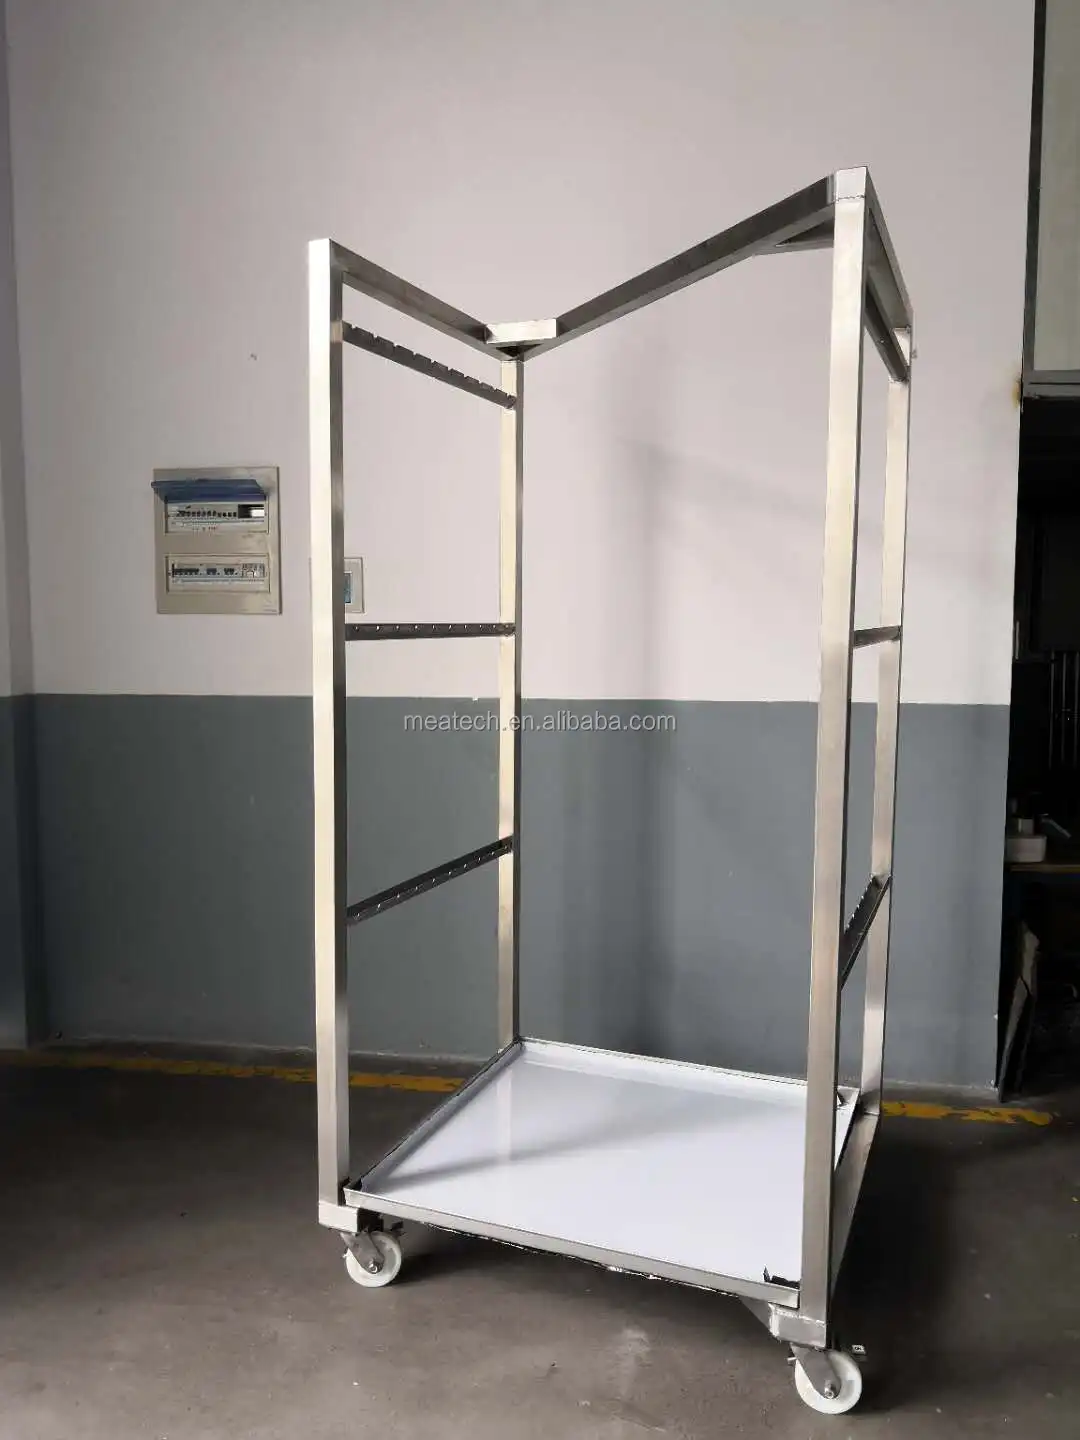 
Meat Hanging Trolley 